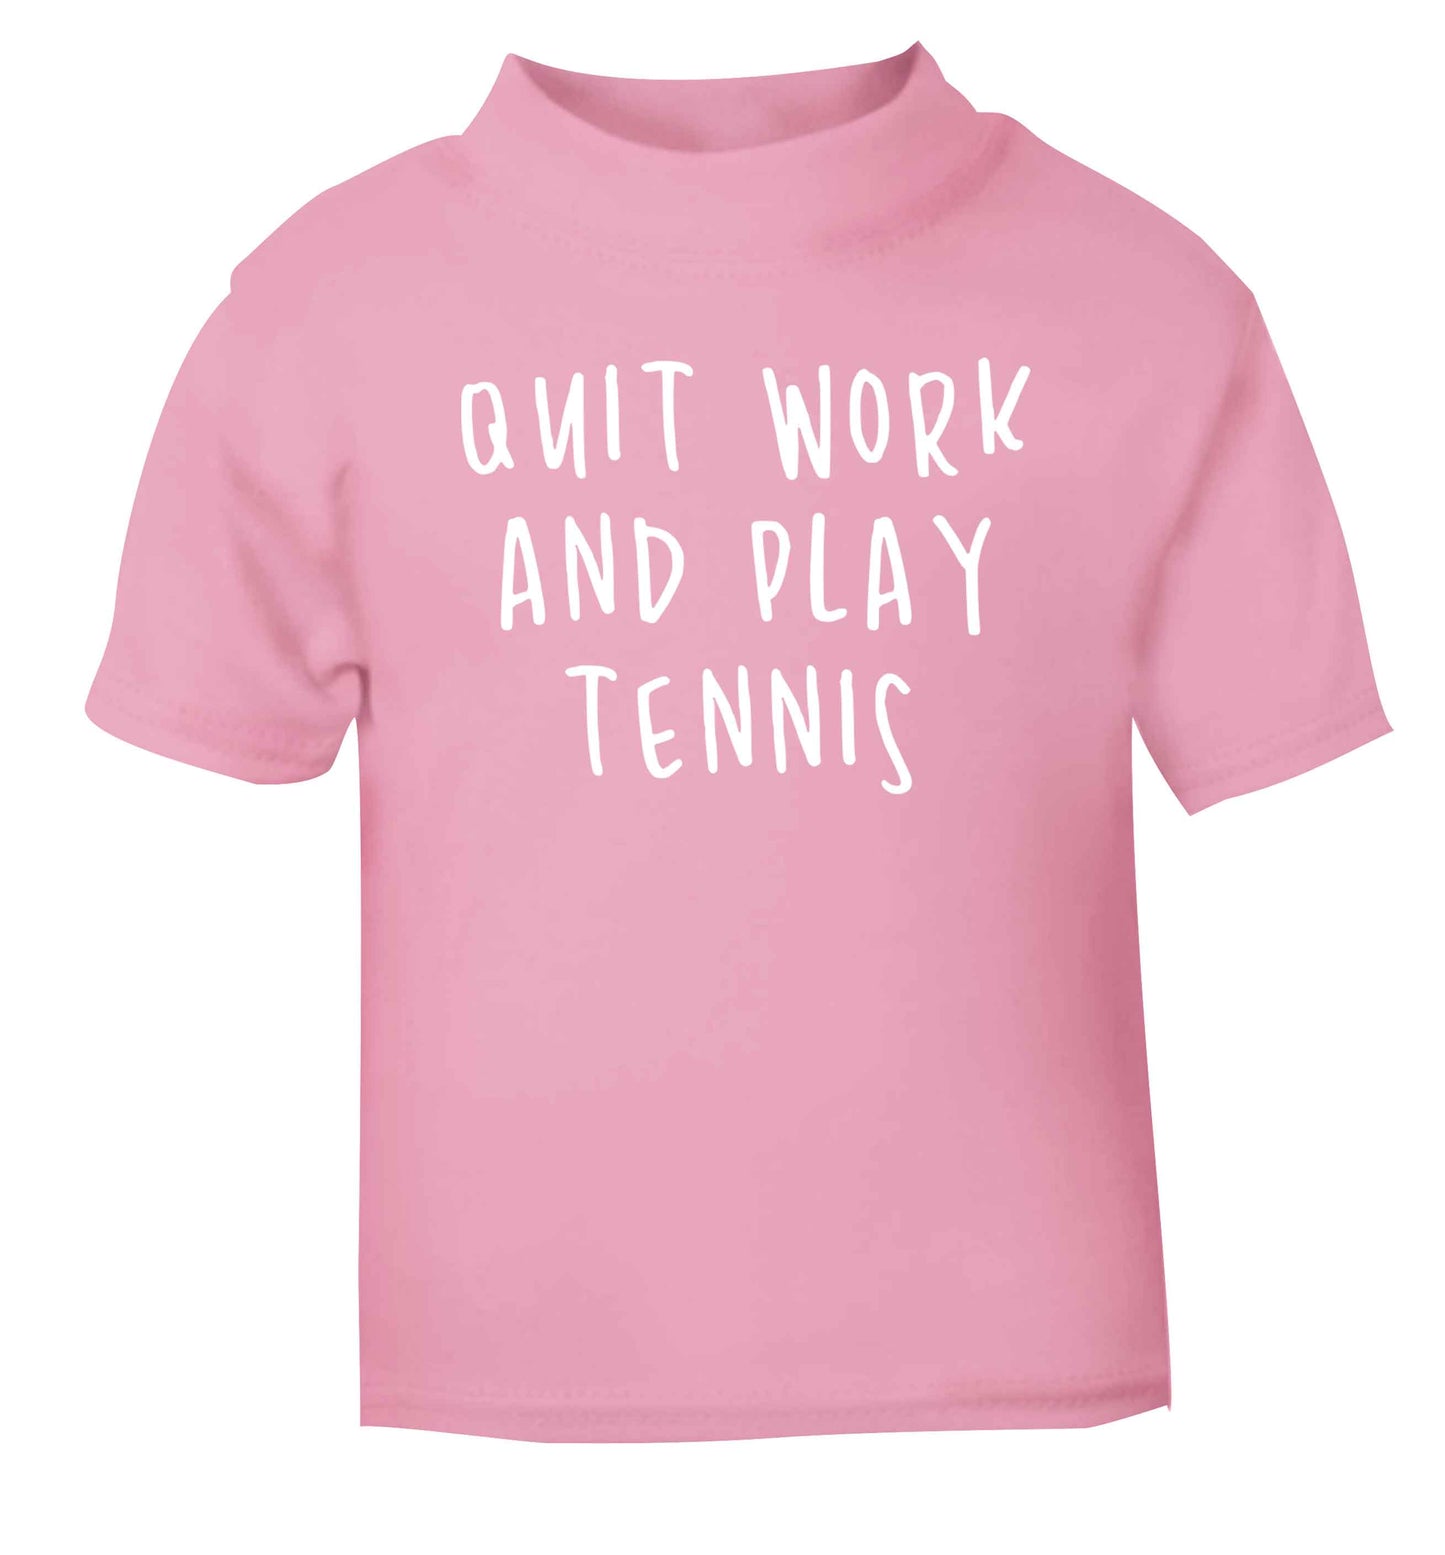 Quit work and play tennis light pink Baby Toddler Tshirt 2 Years